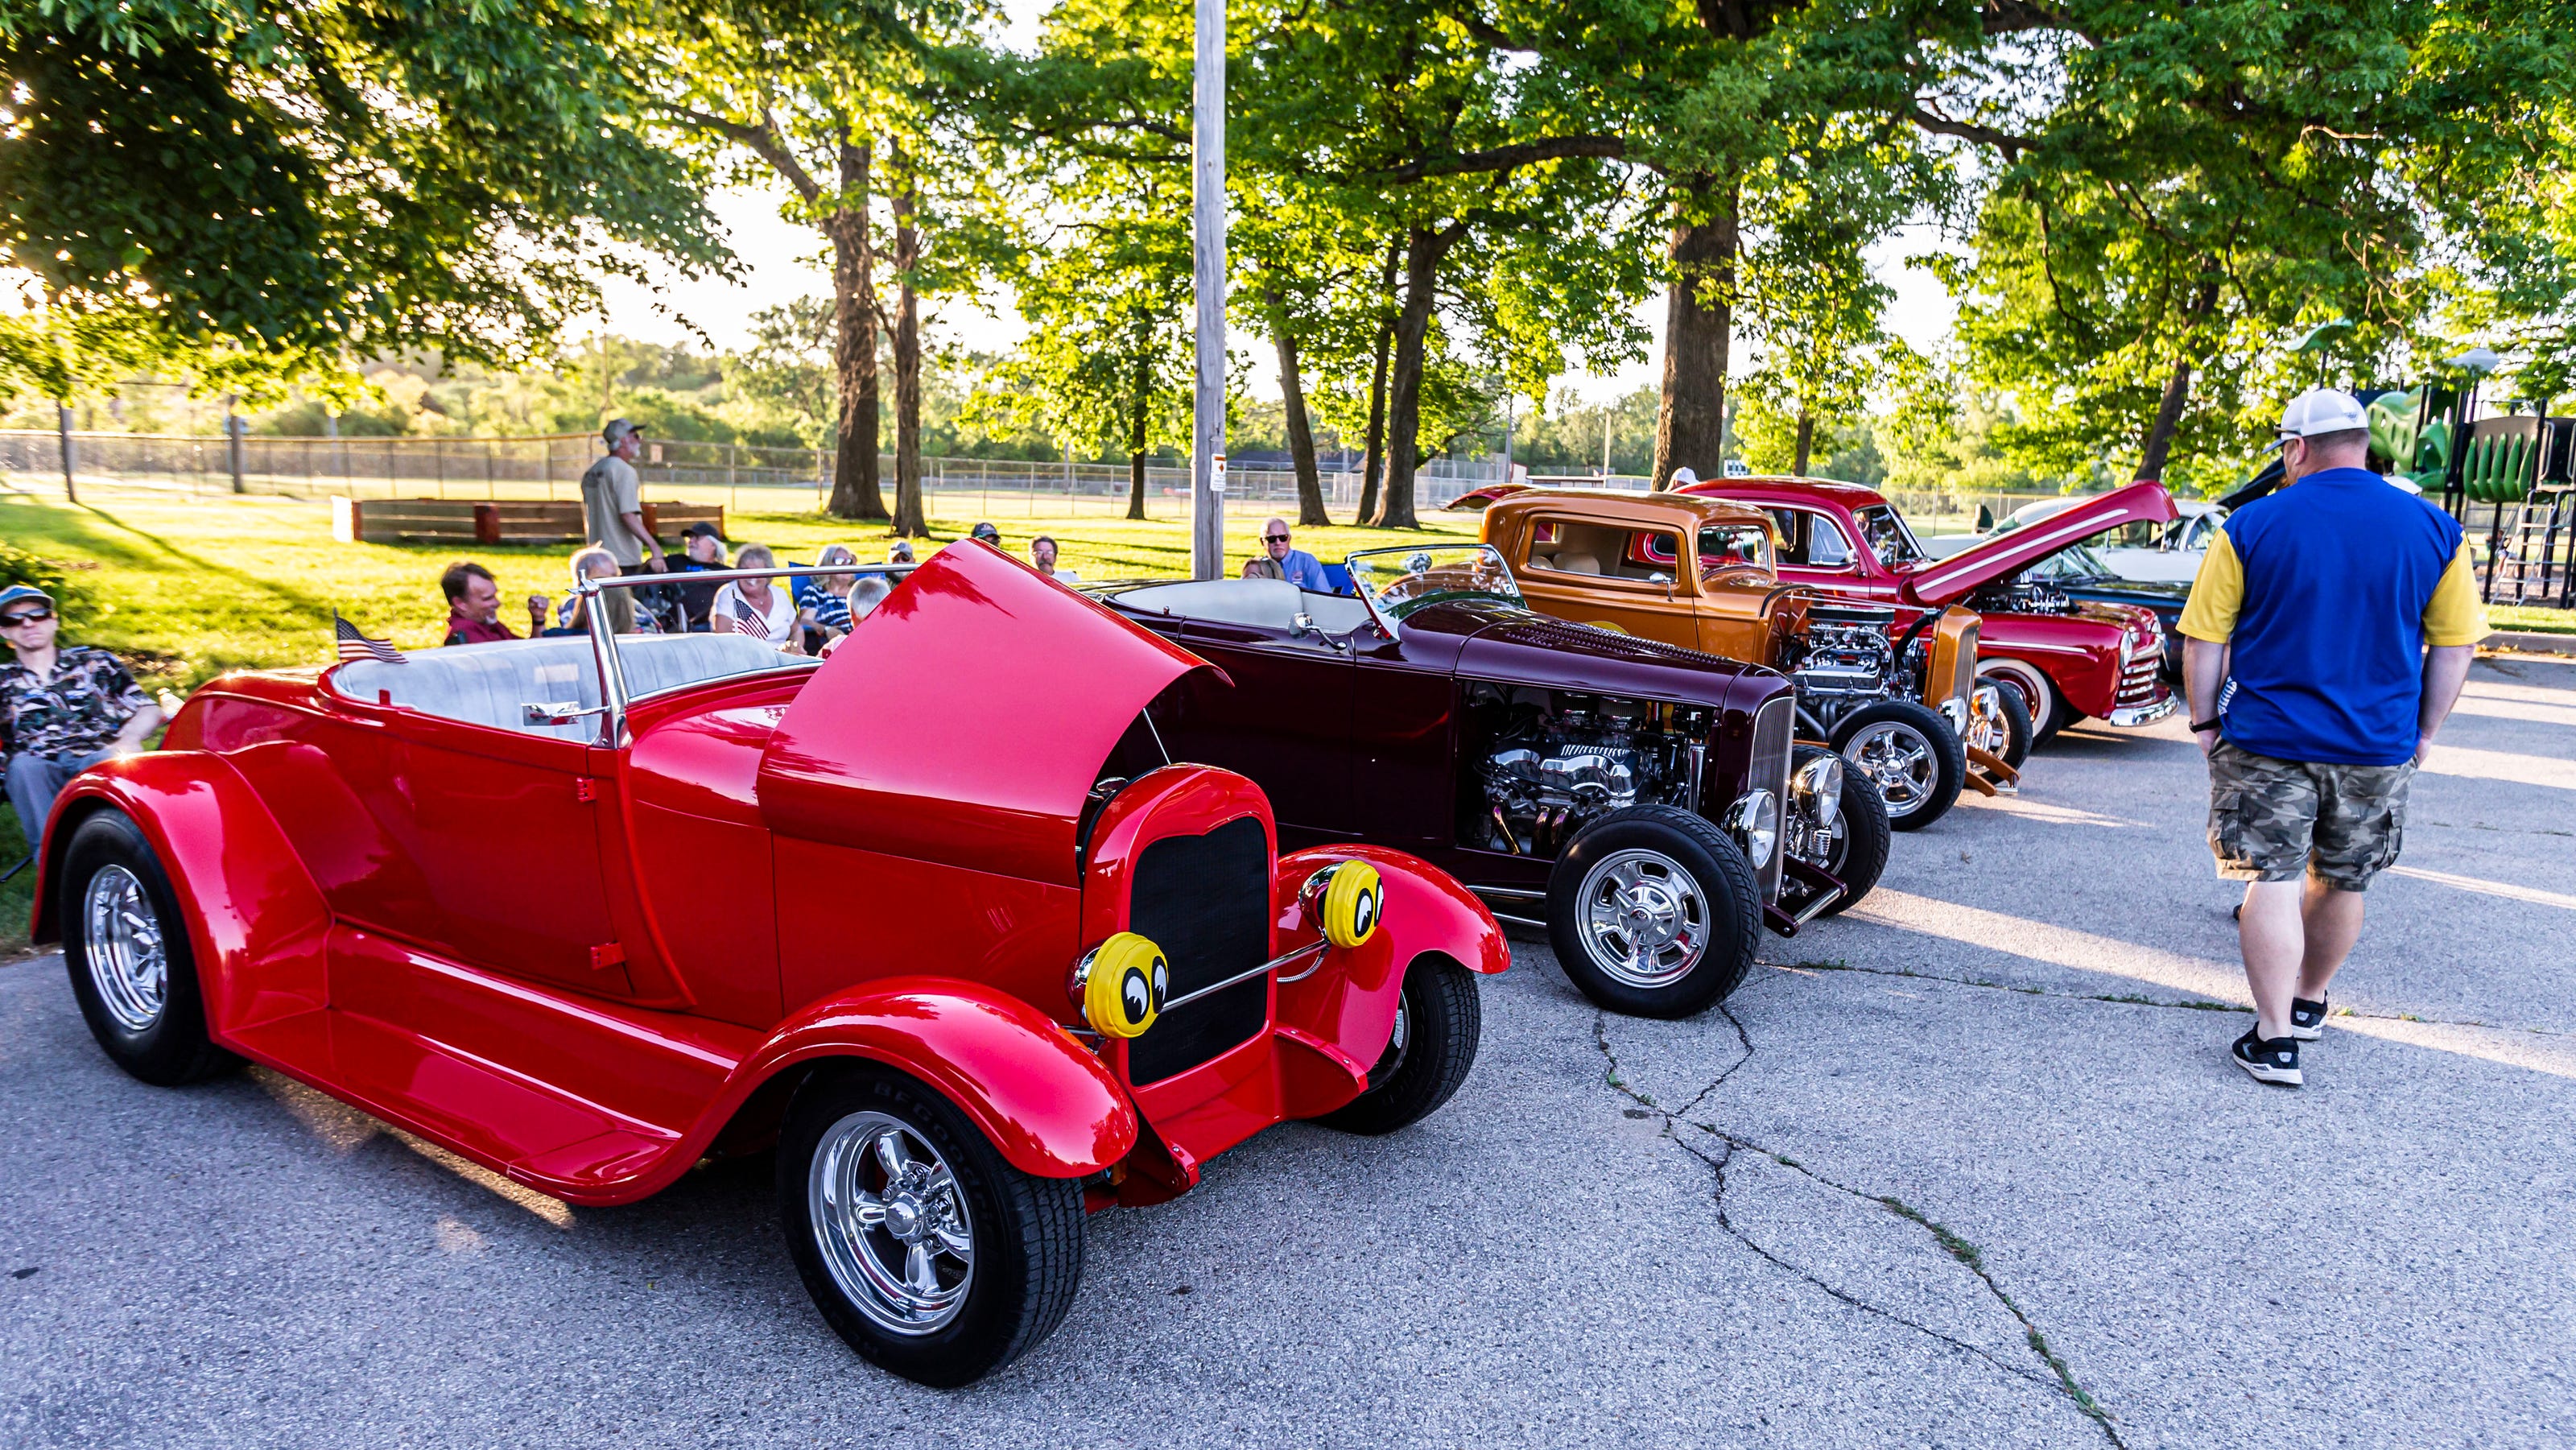 Check out these classic car shows in the Milwaukee area in September